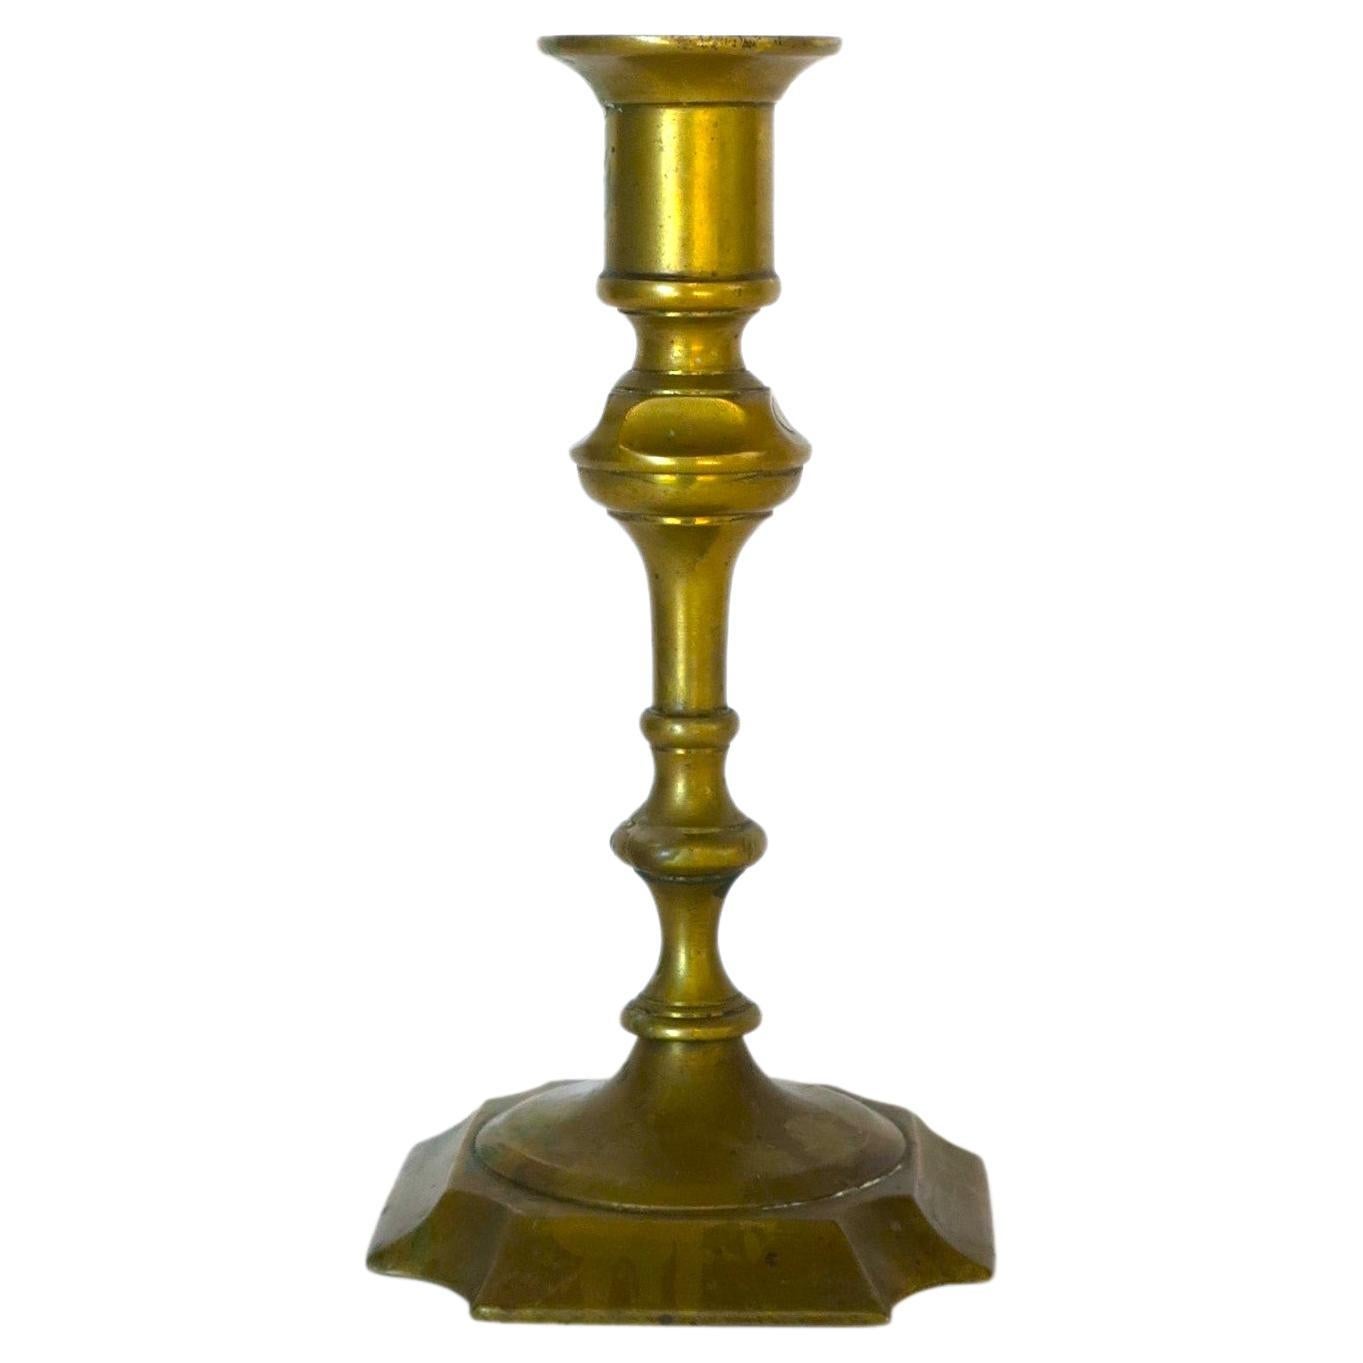 Antique English Brass Candlestick Holder For Sale